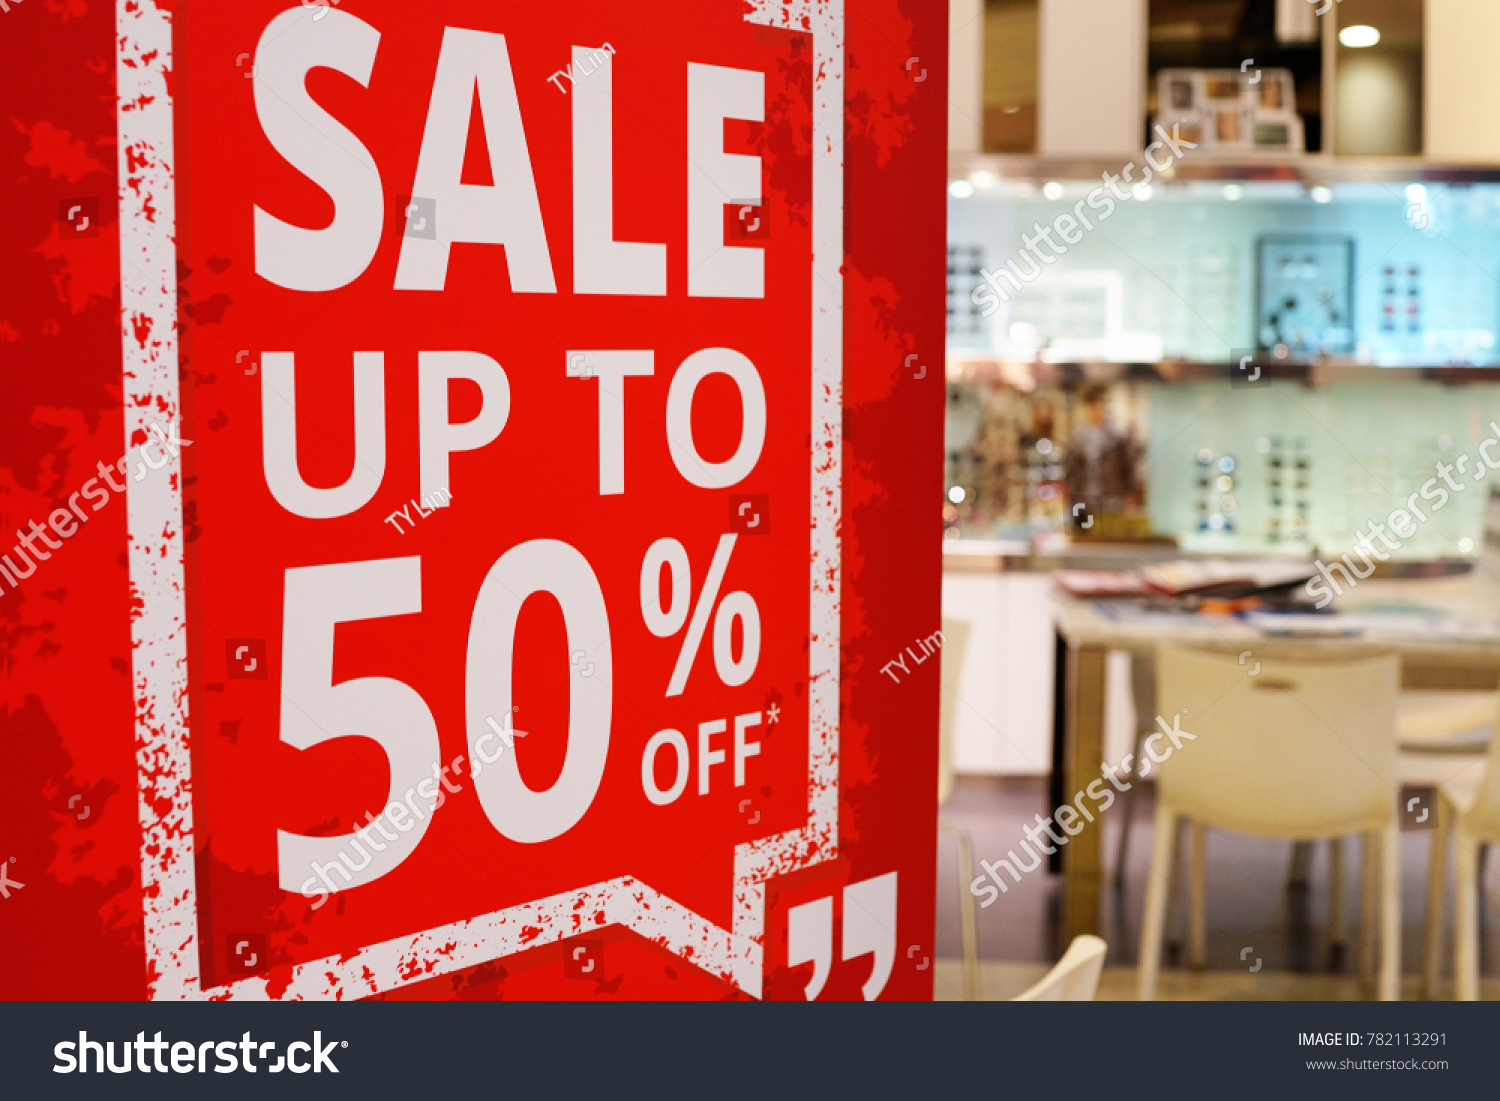 Sale up to 50% off text on a sign board inside a popular optic store  #782113291